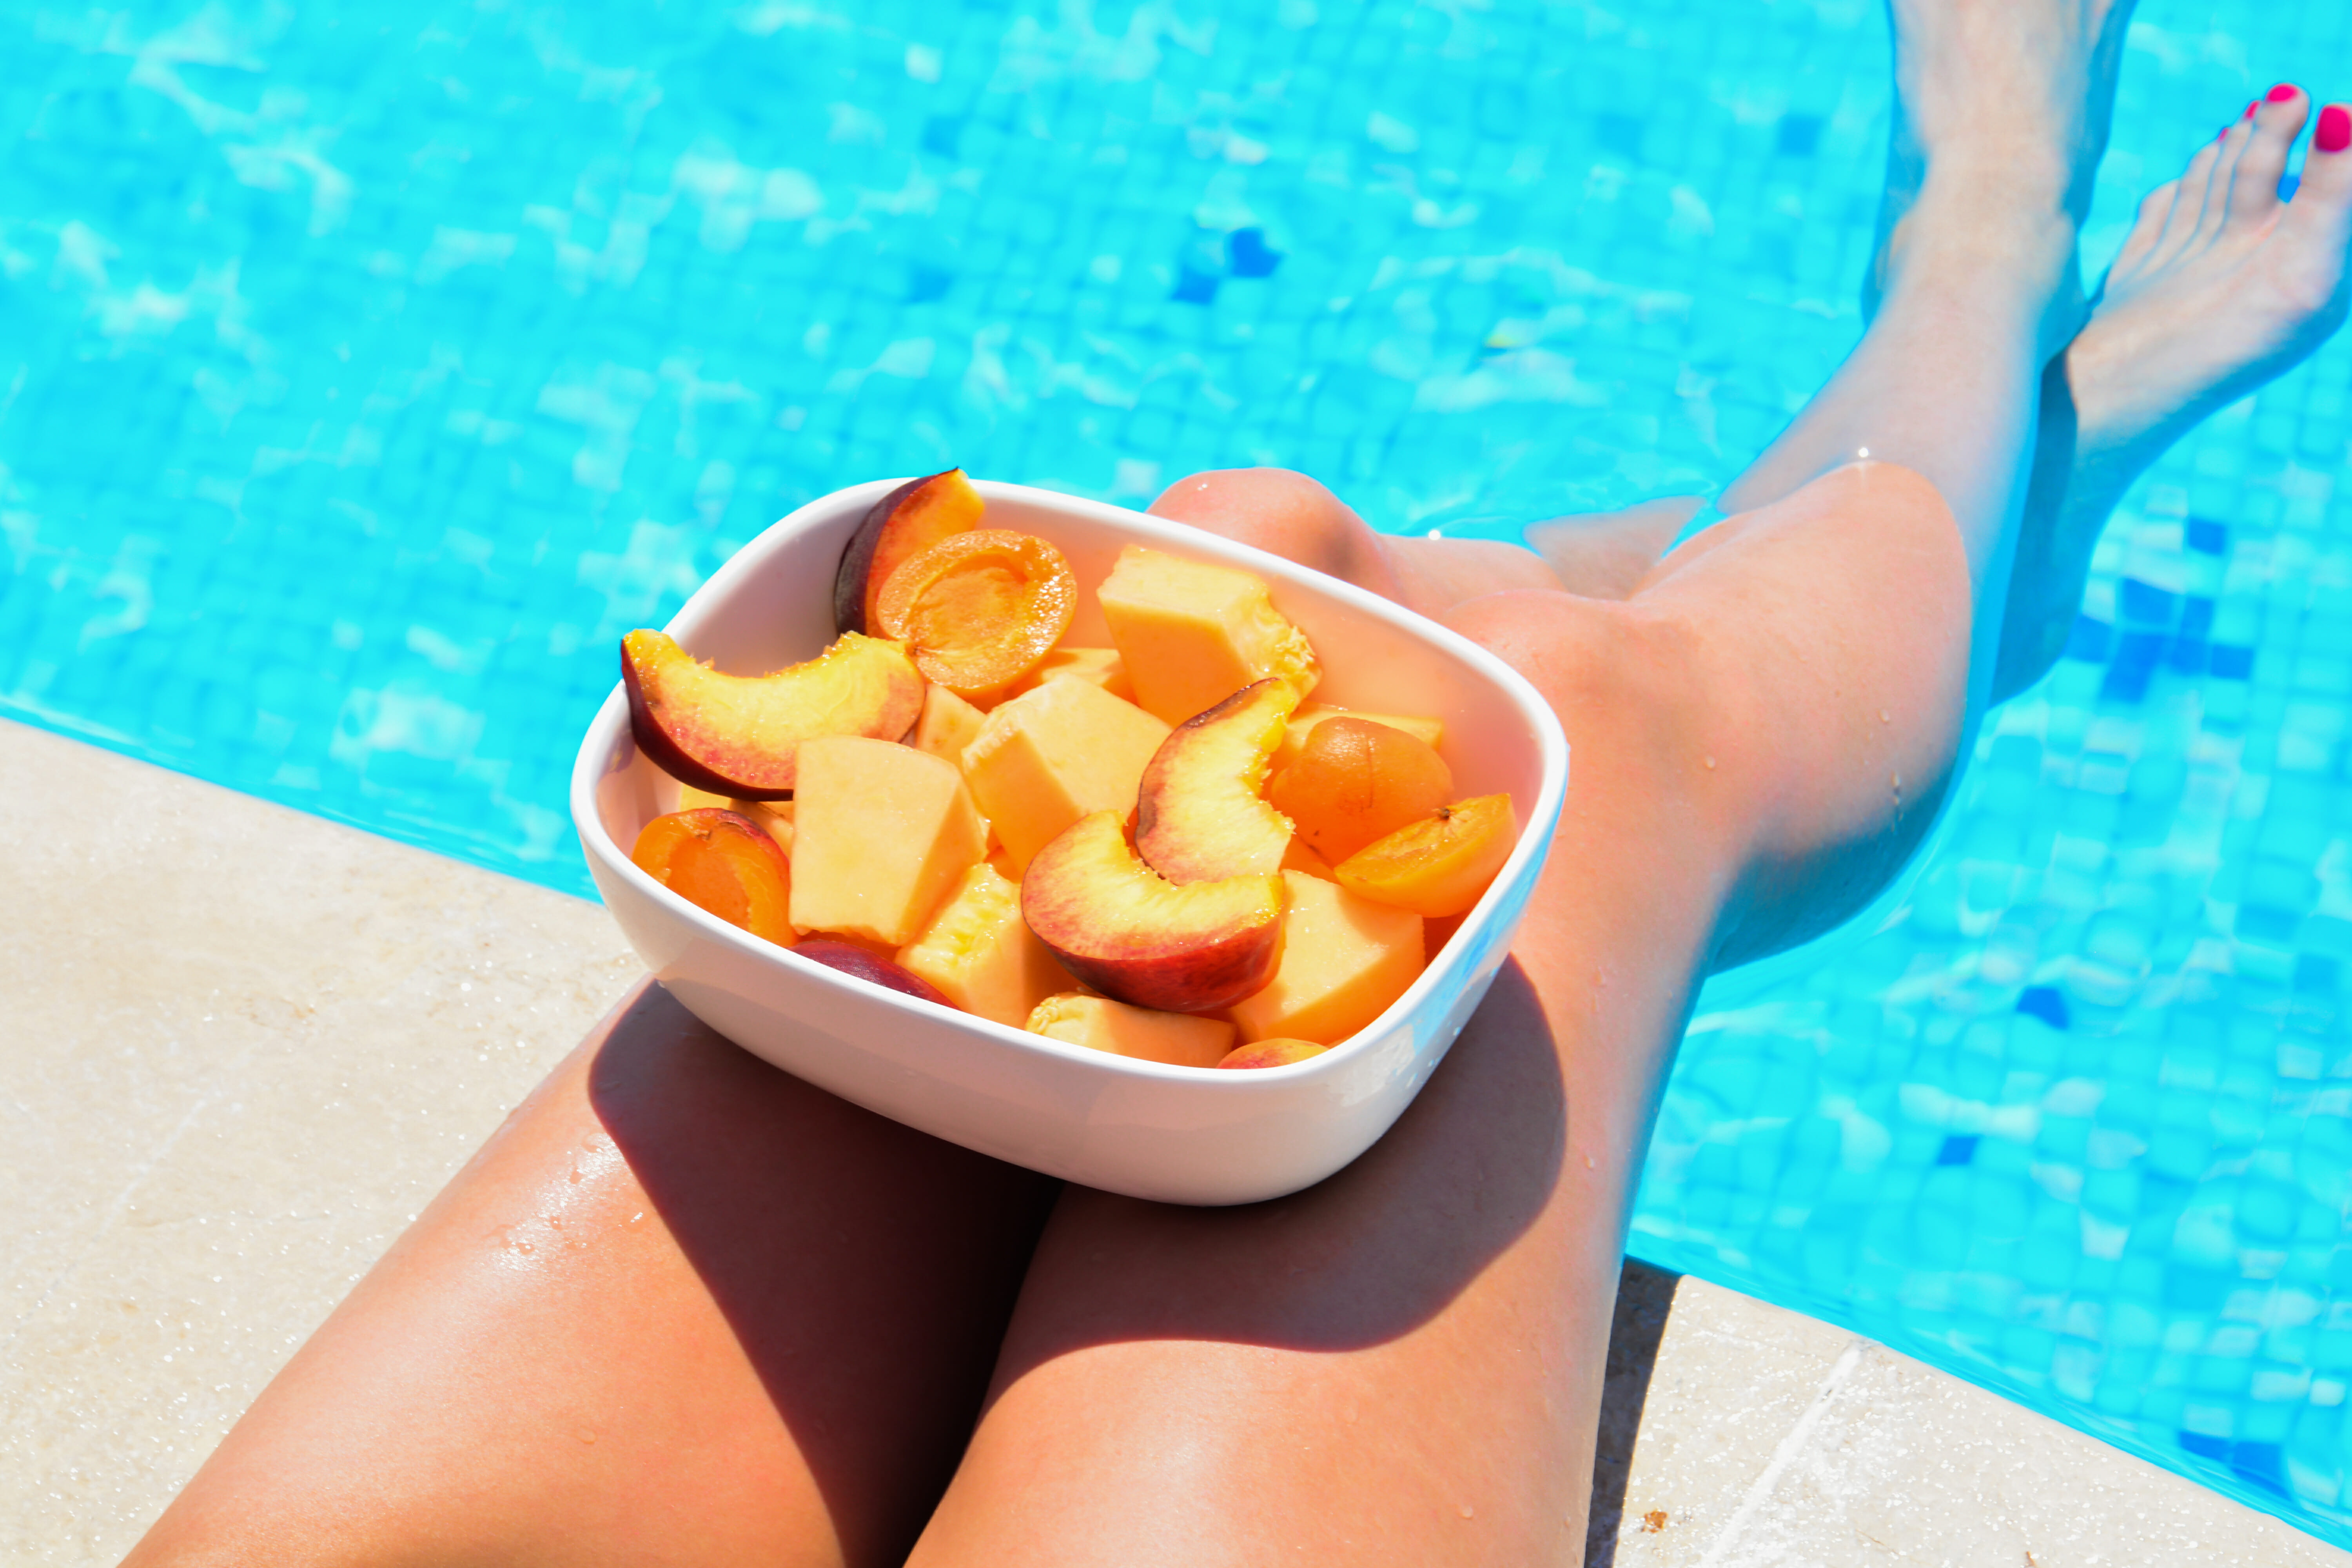 A person relaxing by a pool with a bowl of sliced peaches on their lap, showcasing a close-up of the legs and the colorful pool water.